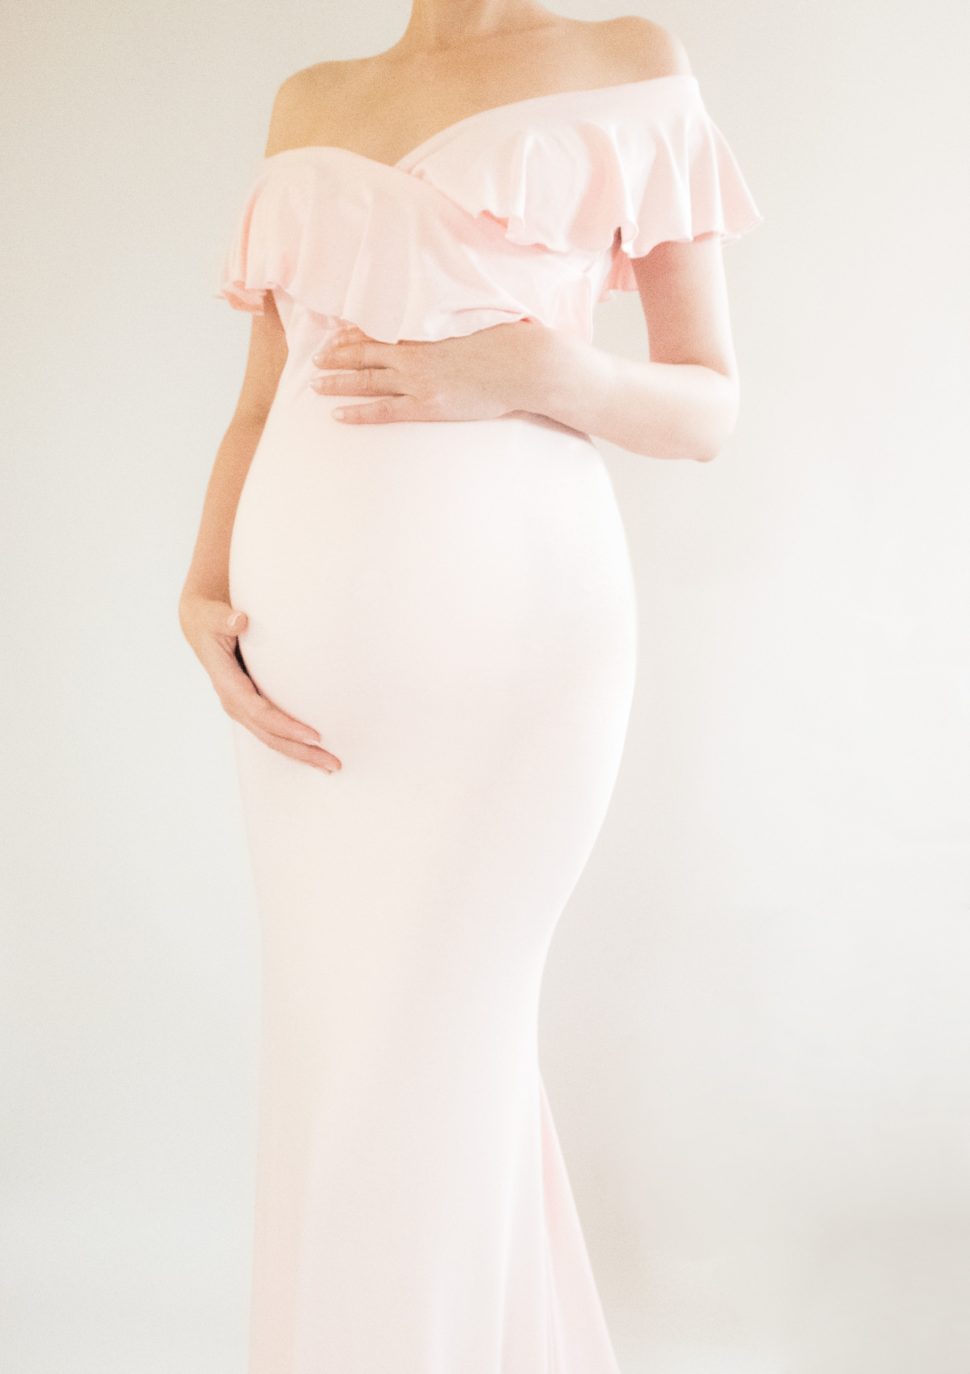 Medium Size of Baby Shower:pink Maternity Dress Maternity Gowns For Photography Maternity Dresses For Baby Shower Mom And Dad Baby Shower Outfits Pink Maternity Dress Baby Shower Attire For Mom Maternity Gown Style Maternity Gowns For Photography